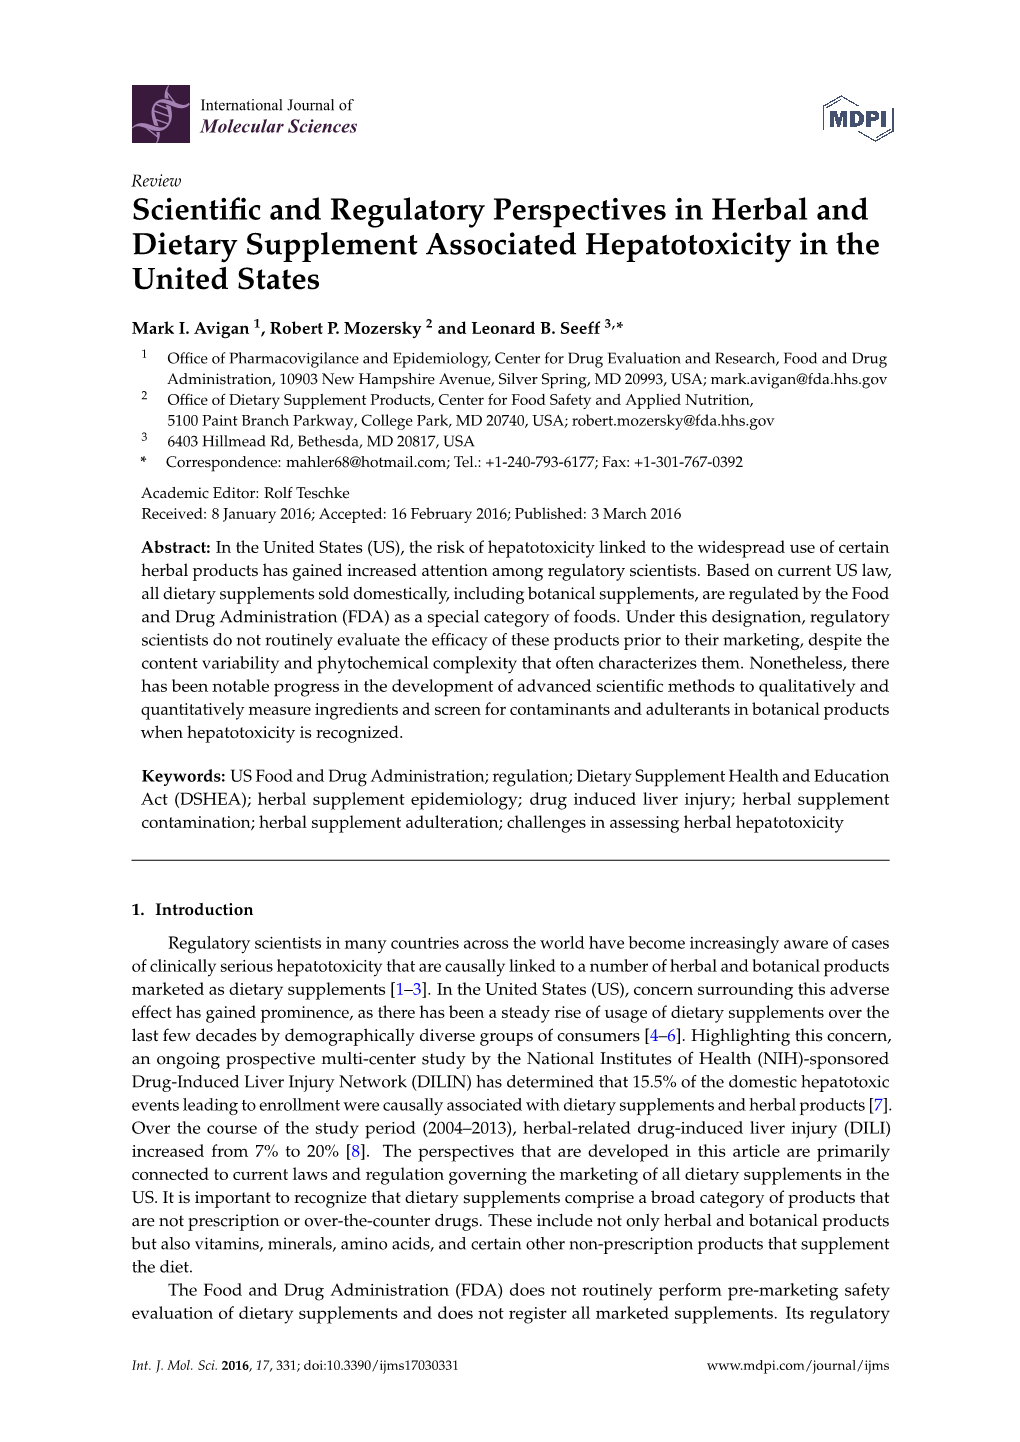 Scientific and Regulatory Perspectives in Herbal and Dietary Supplement Associated Hepatotoxicity in the United States